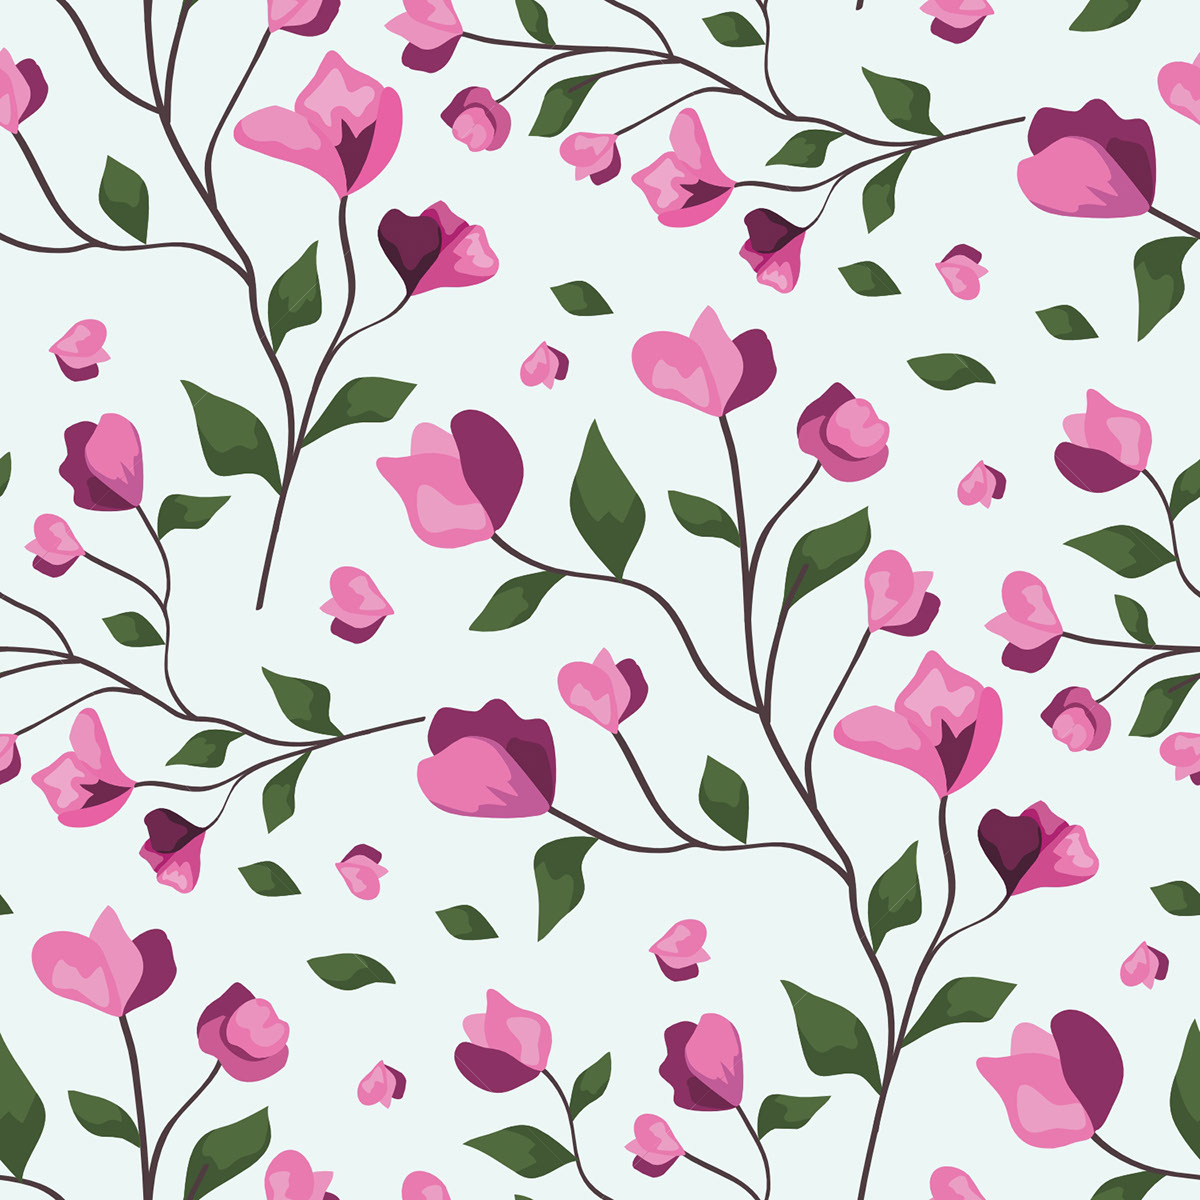 buff fabric seamless floral pattern rendition image